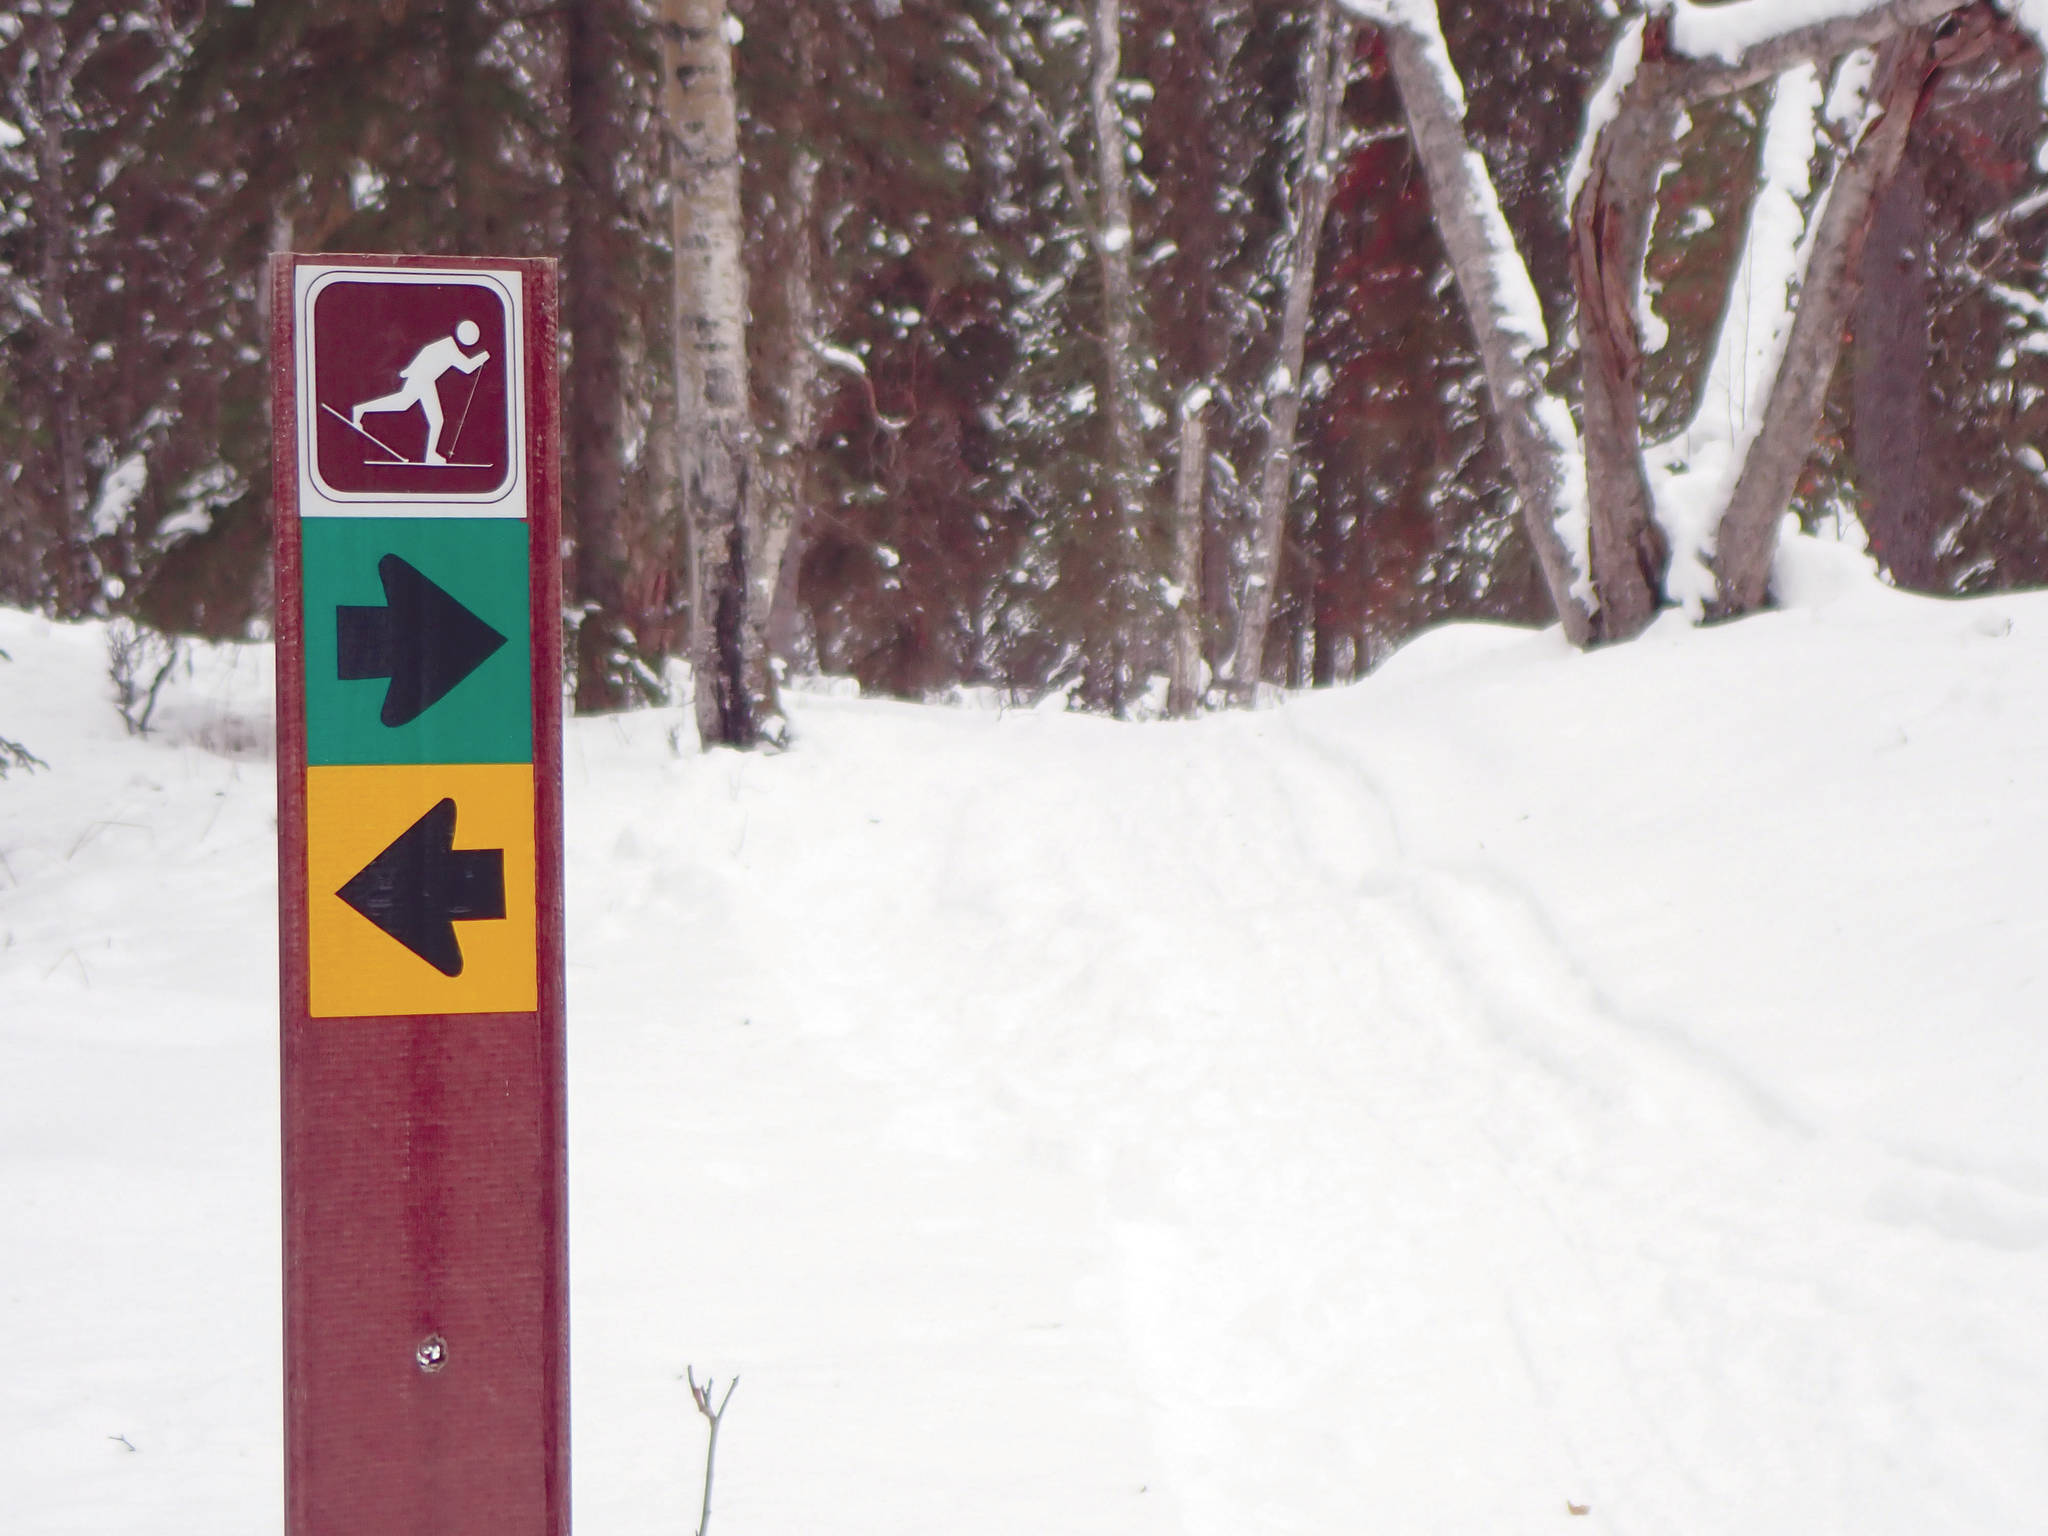 A sign marks one of the groomed ski trails on the Kenai National Wildlife Refuge. (Photo by Matt Bowser/Kenai National Wildlife Refuge)